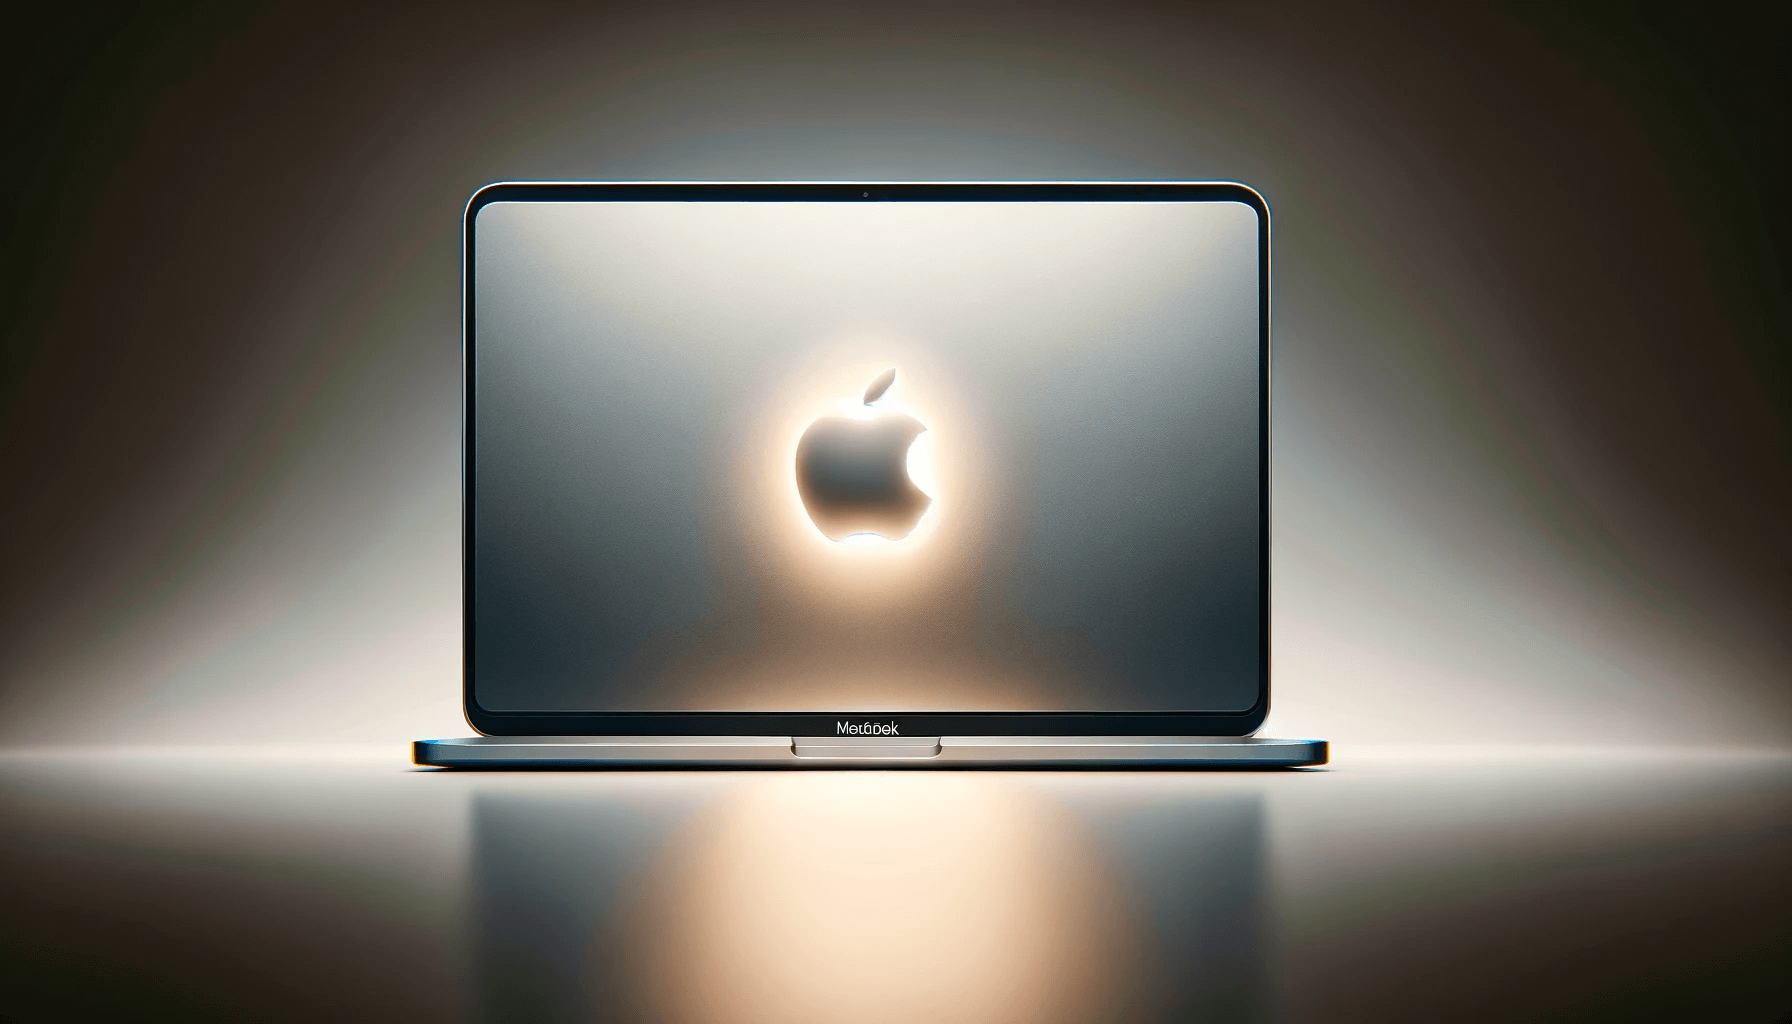 DALL·E 2023 11 17 13.02.43 A digital illustration of the Apple logo on a MacBook. The MacBook is depicted in a realistic style showing its sleek and modern design. The focus of